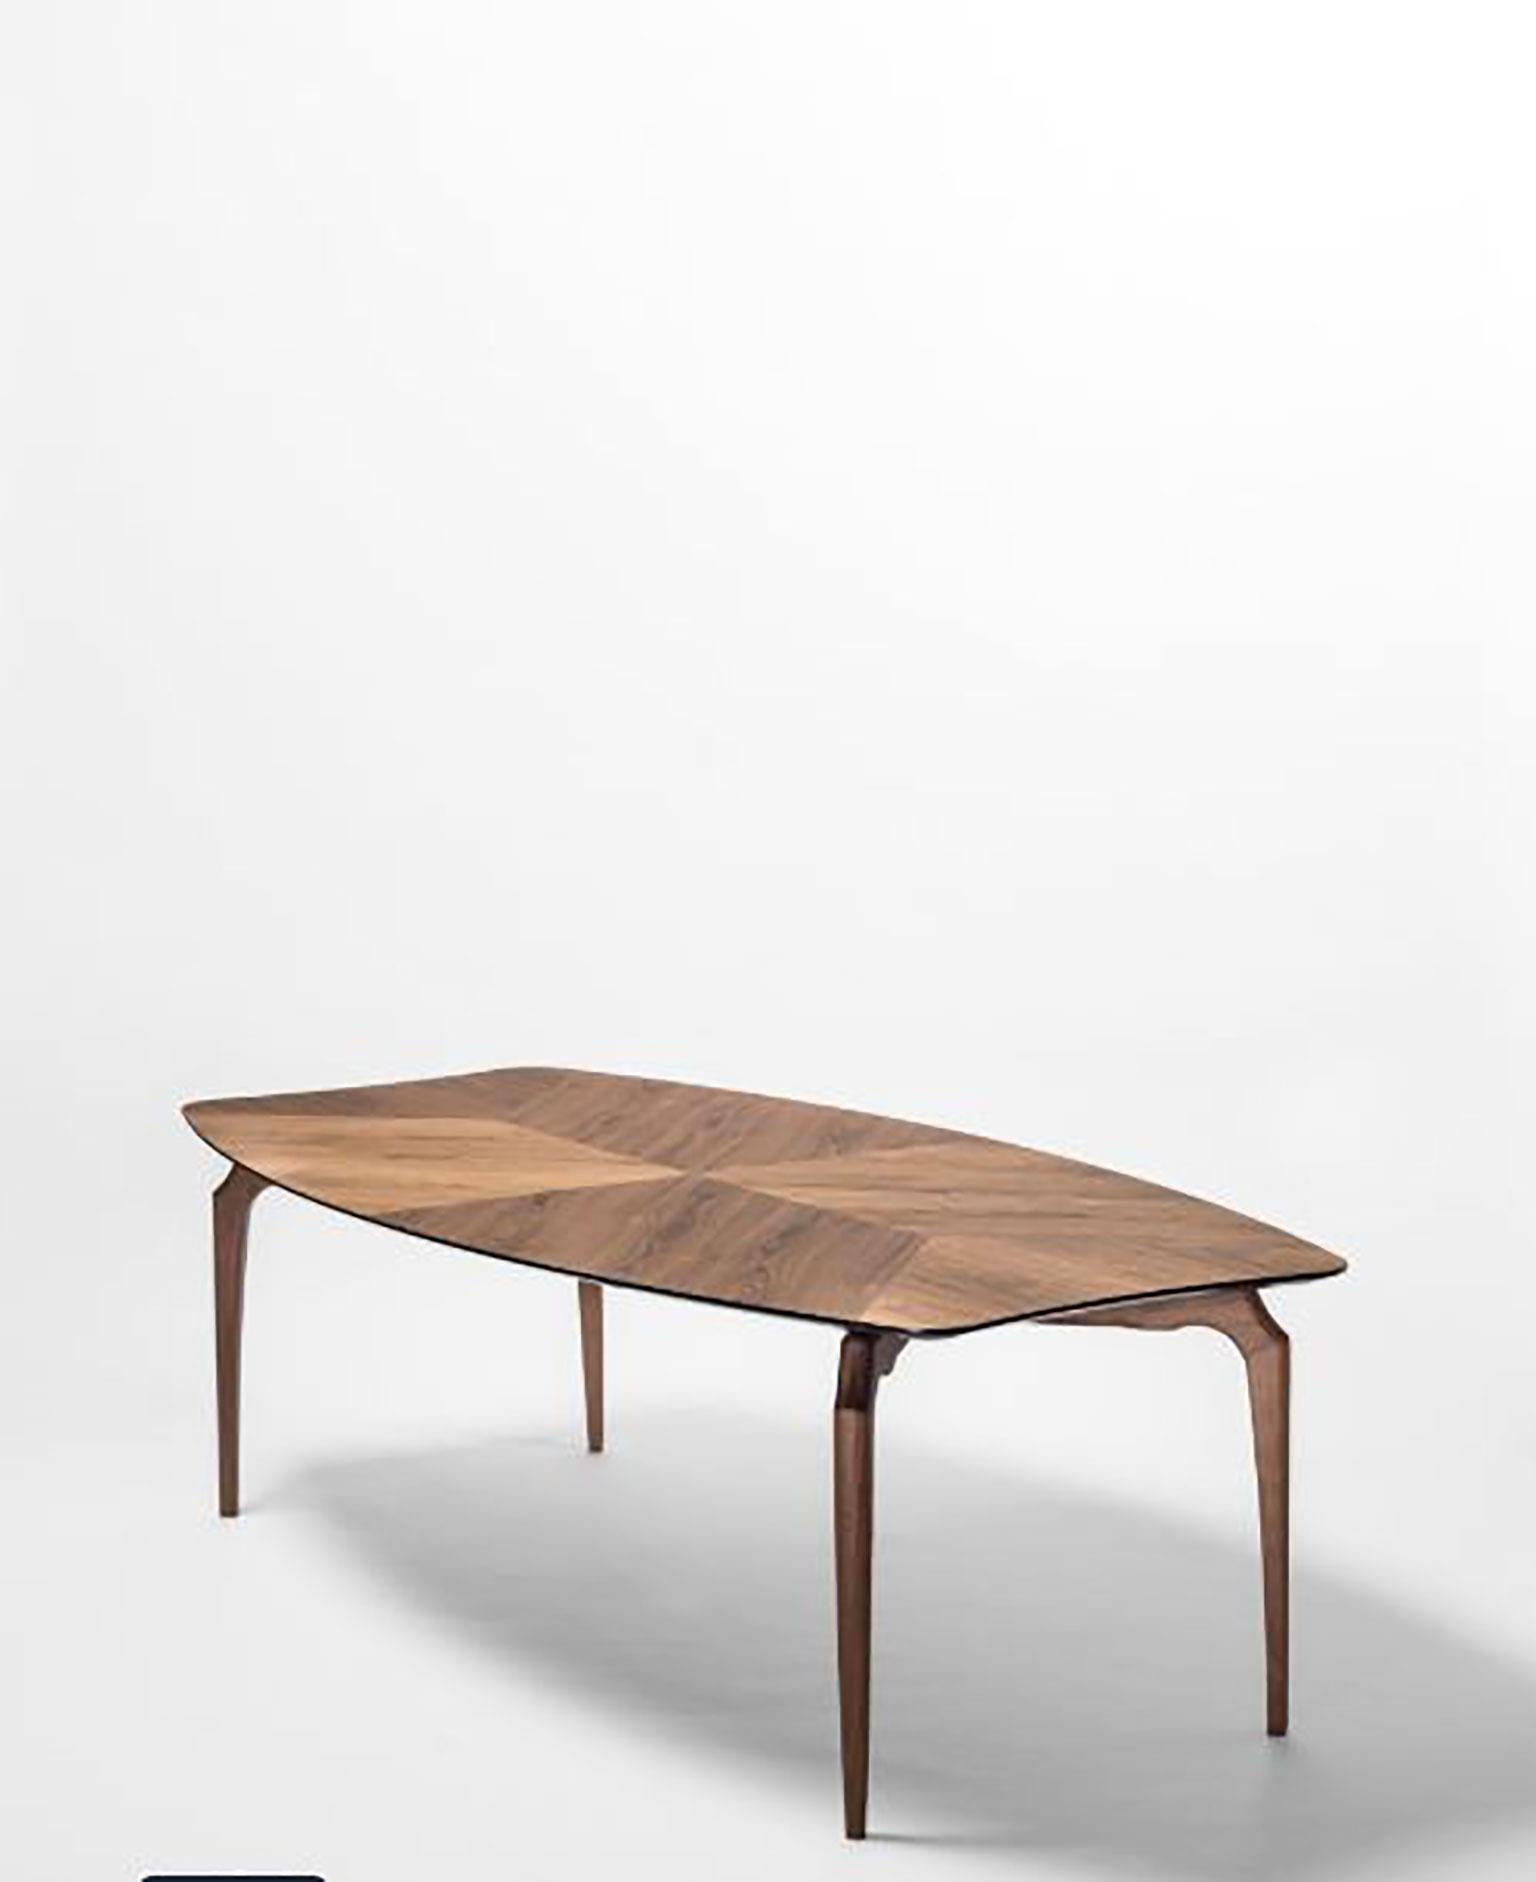 Gaulino Table designed by Oscar Tusquets Blanca for BD Barcelona. Oscar Tusquets Blanca typically introduces himself freely as an architect by training, designer by reworking, a painter by occupation, and a writer through ambition. This was